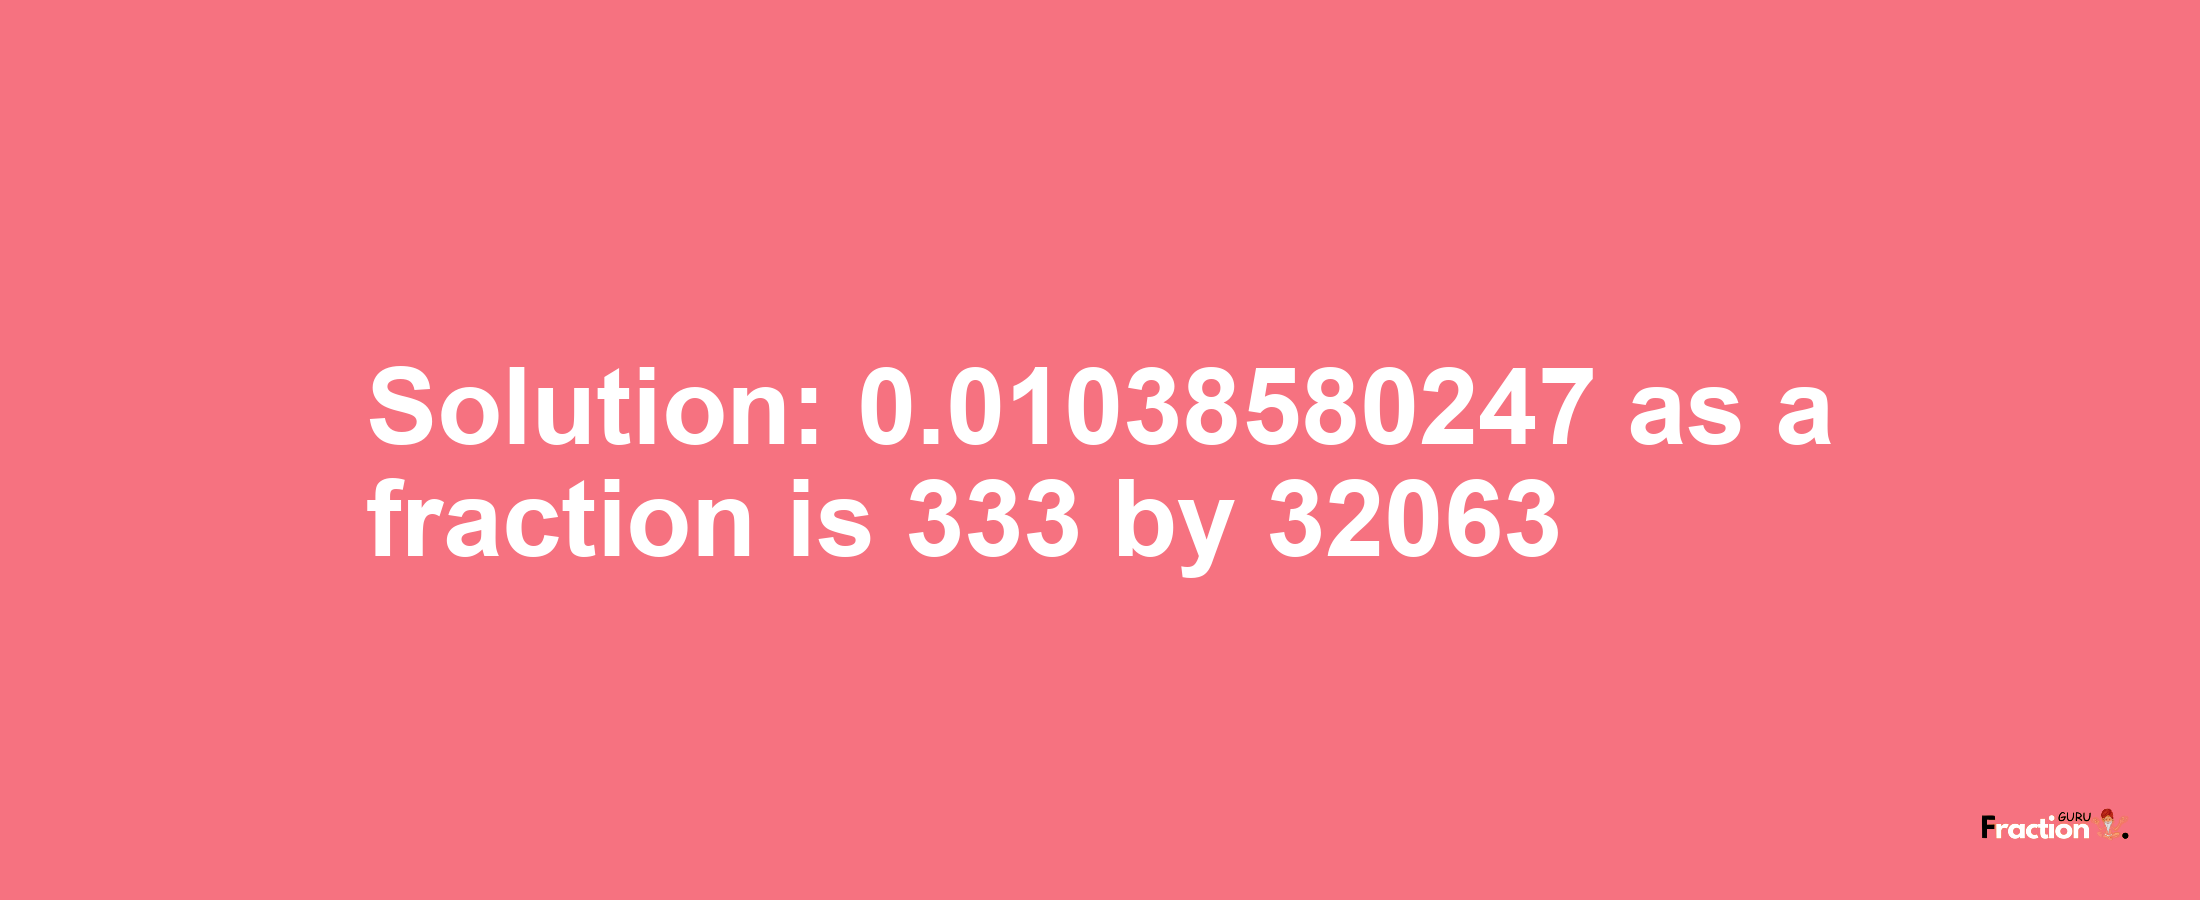 Solution:0.01038580247 as a fraction is 333/32063